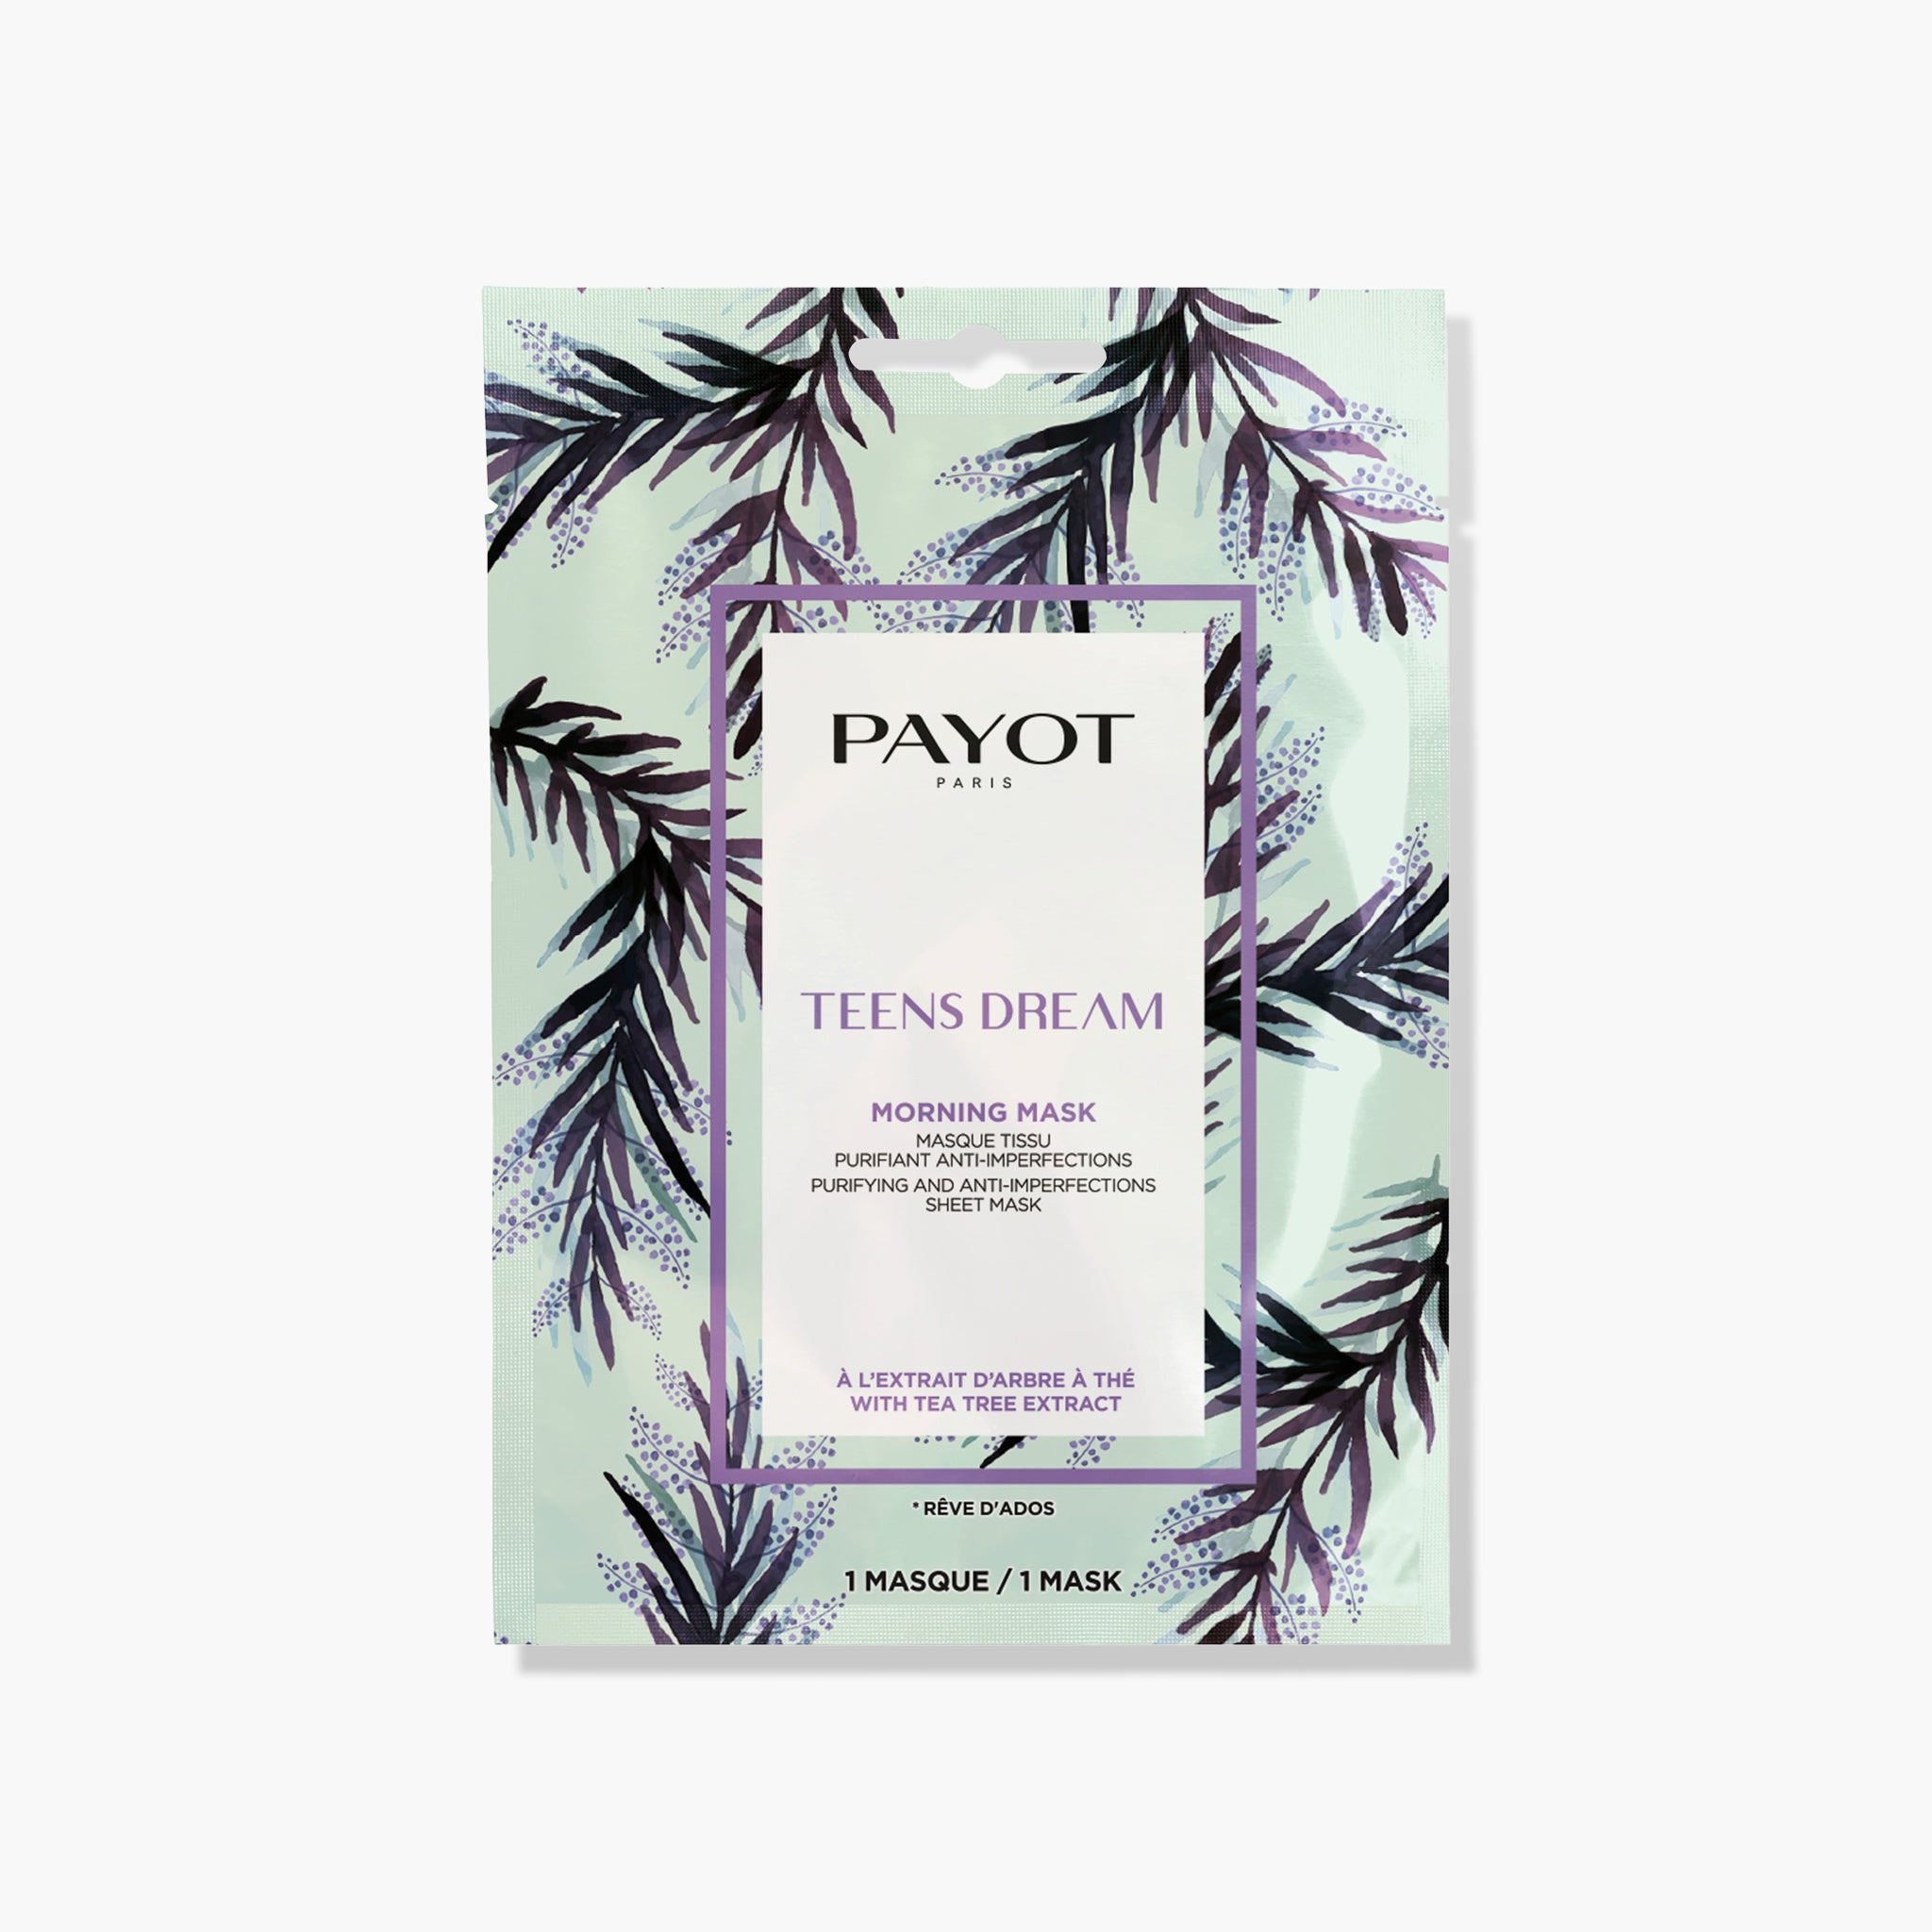 Payot Purifying & Anti-Imperfections Skeet Mask